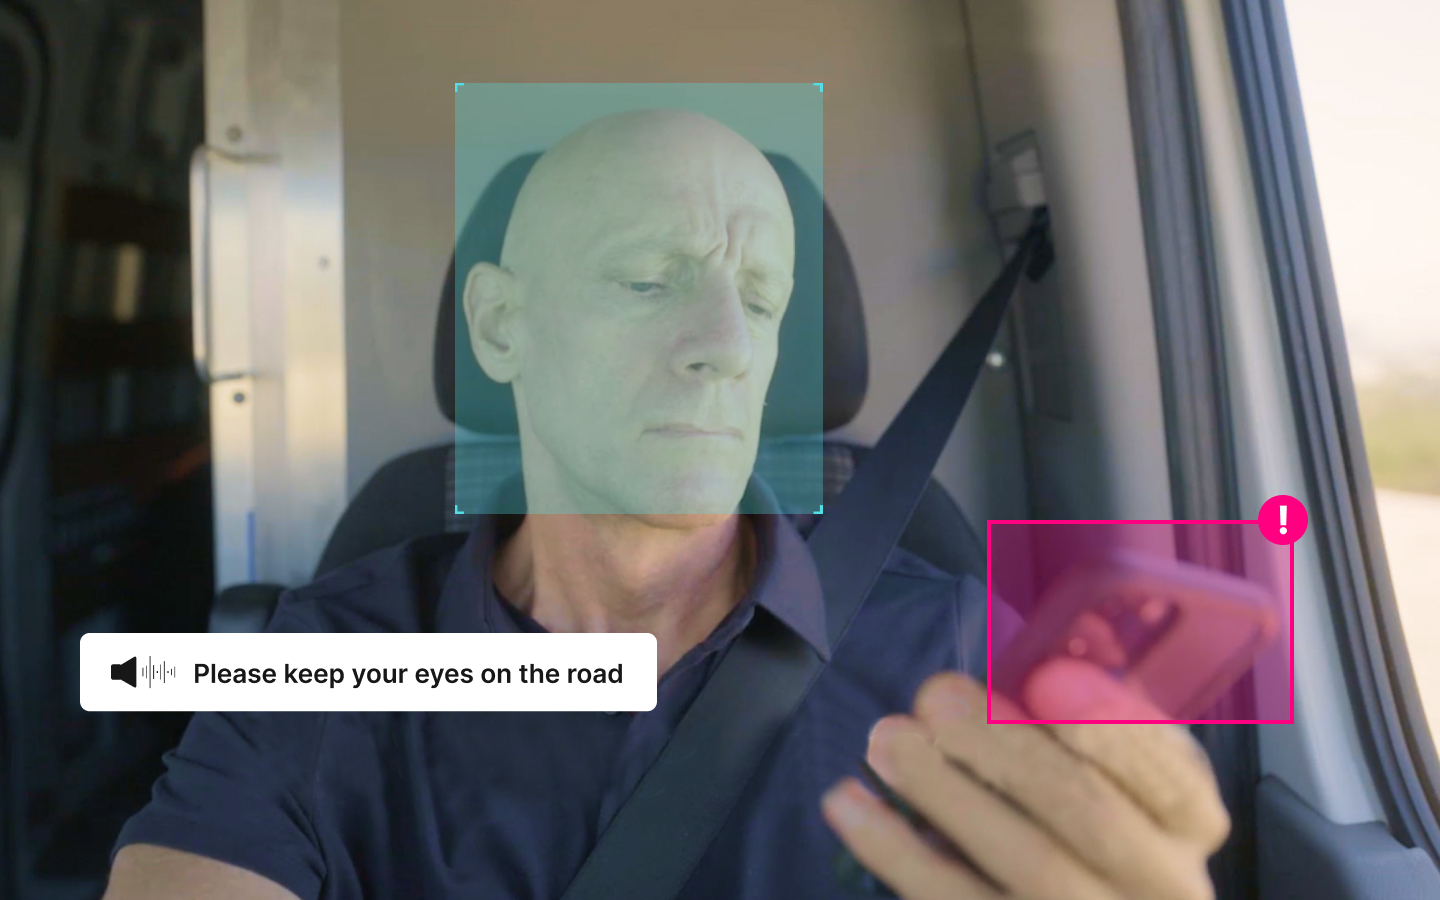 Truck Dash Cam Shows Distracted Driving - Fleet Management Solutions by GPS  Trackit